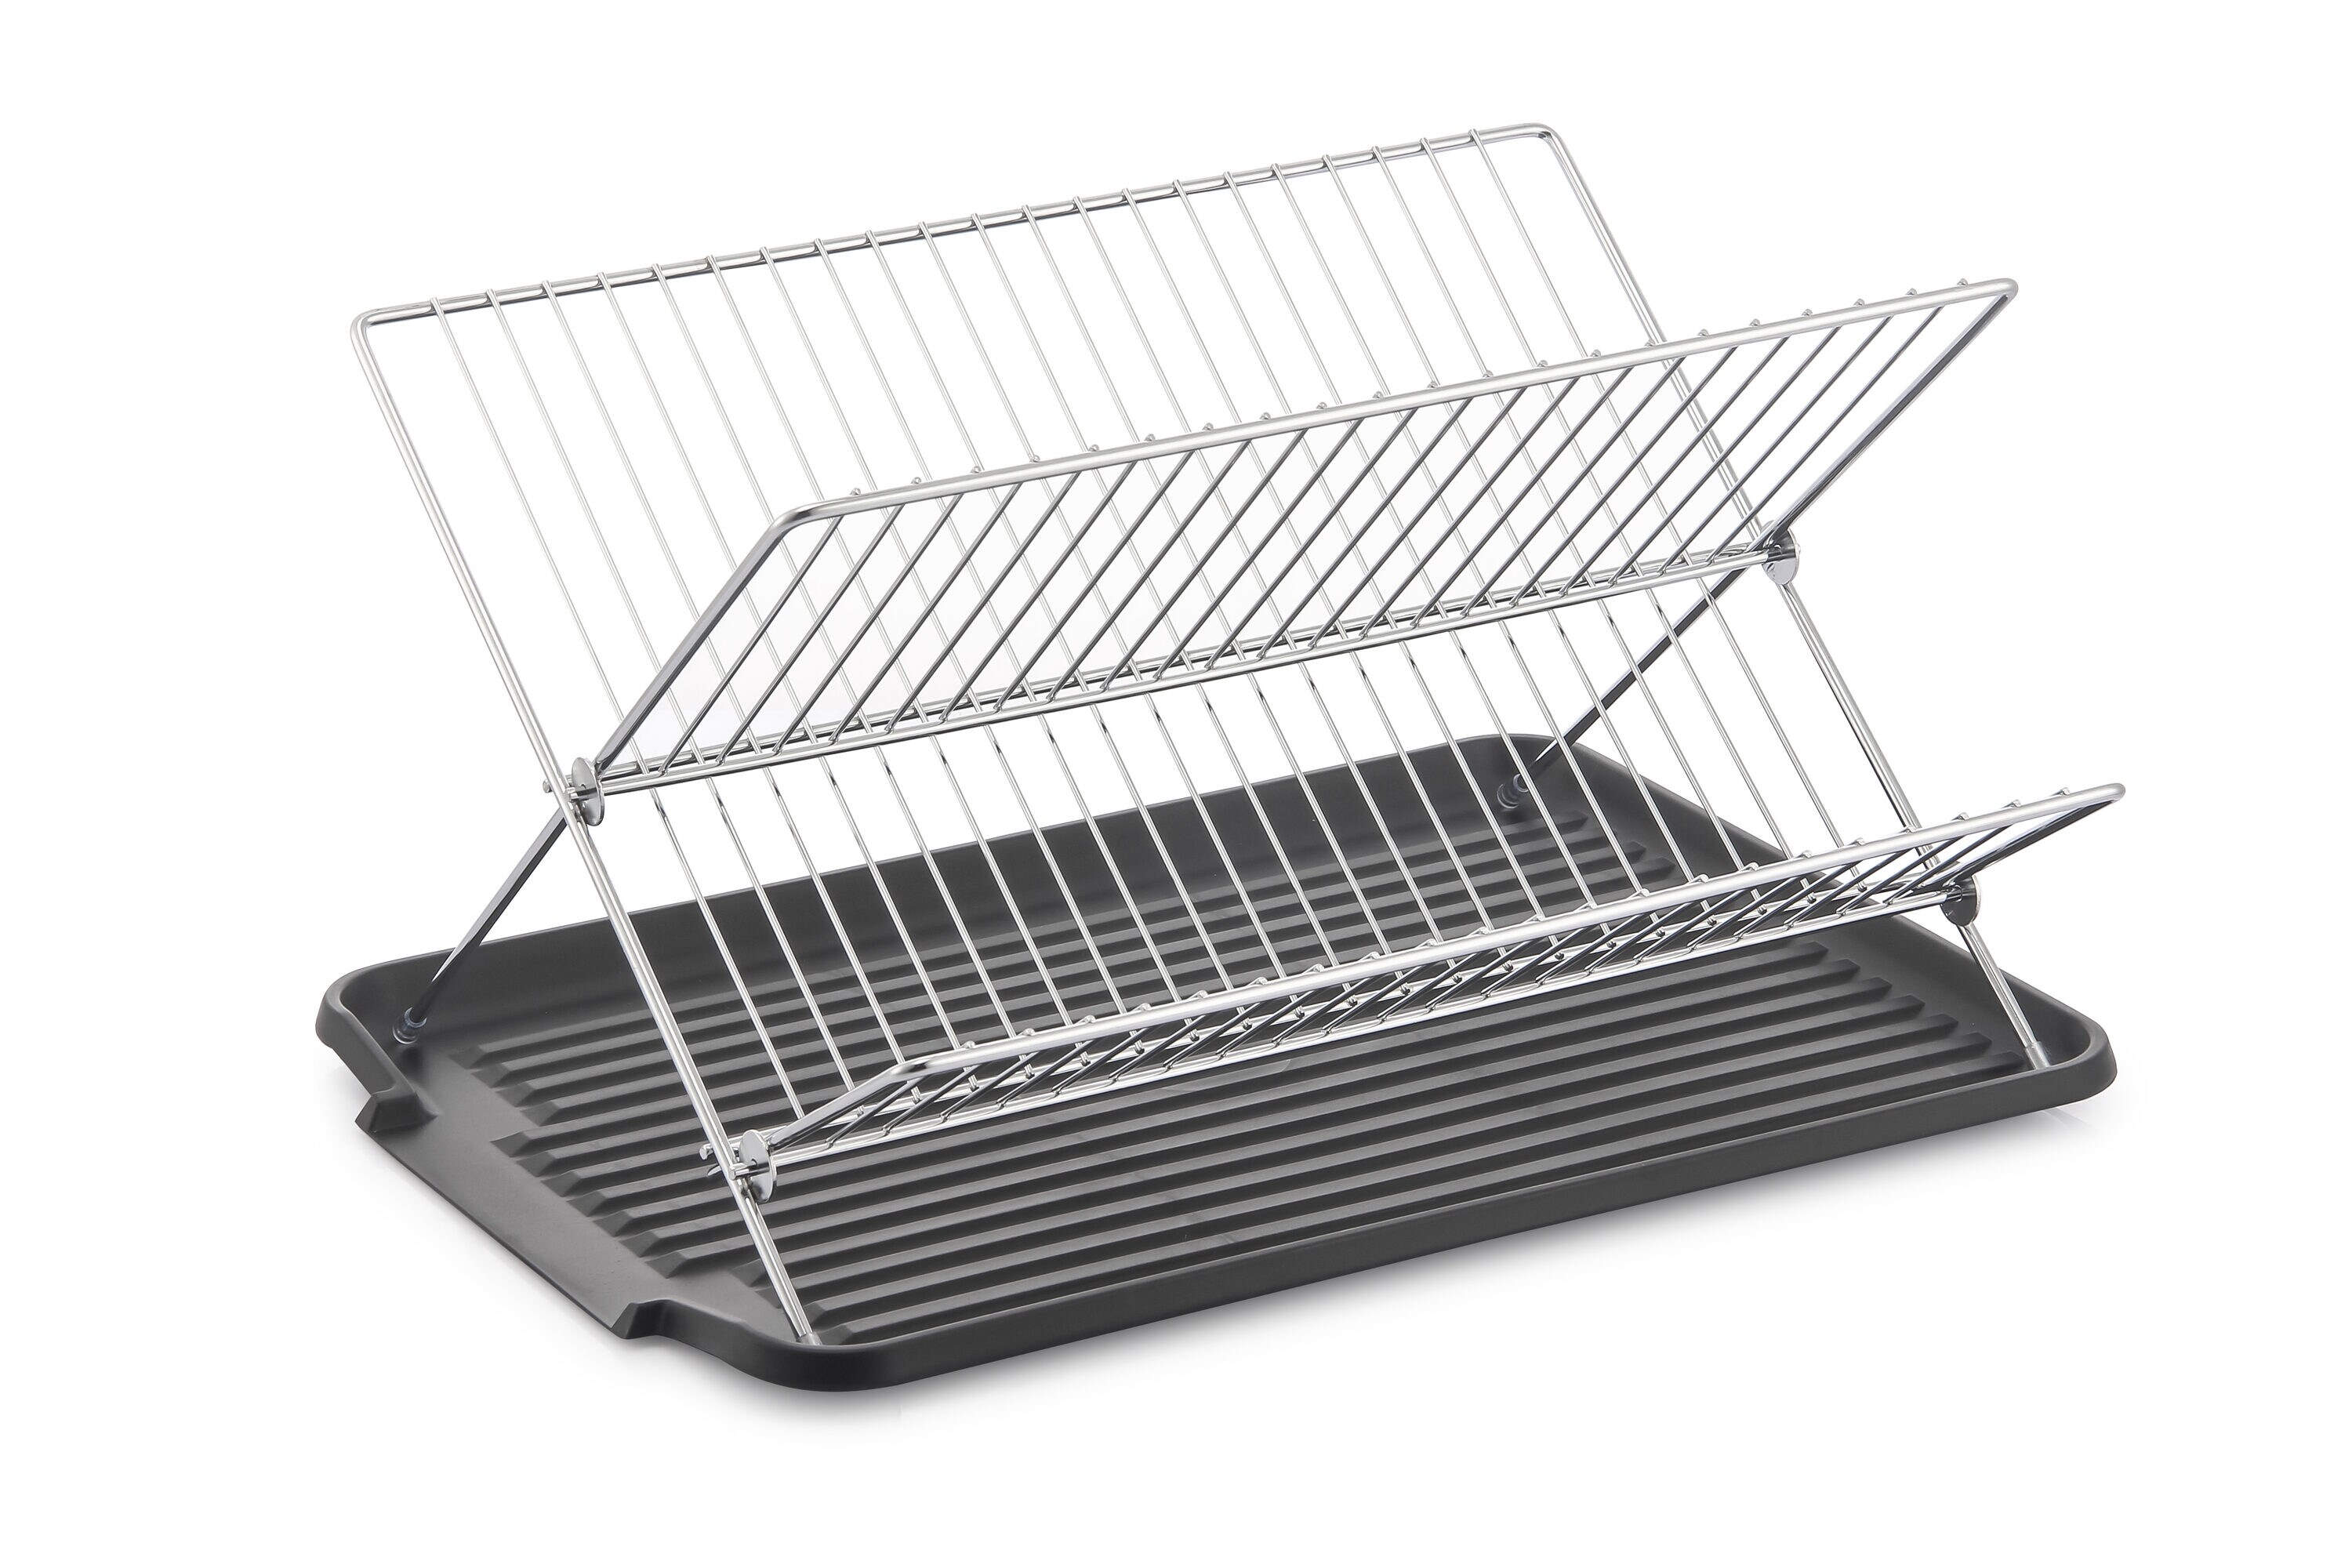 J&V TEXTILES Dish Drying Rack, Stainless Steel 2-Tier with Utensil Holder,  Cutting Board Holder and Dish Drainer for Kitchen Counter (18-Inch)